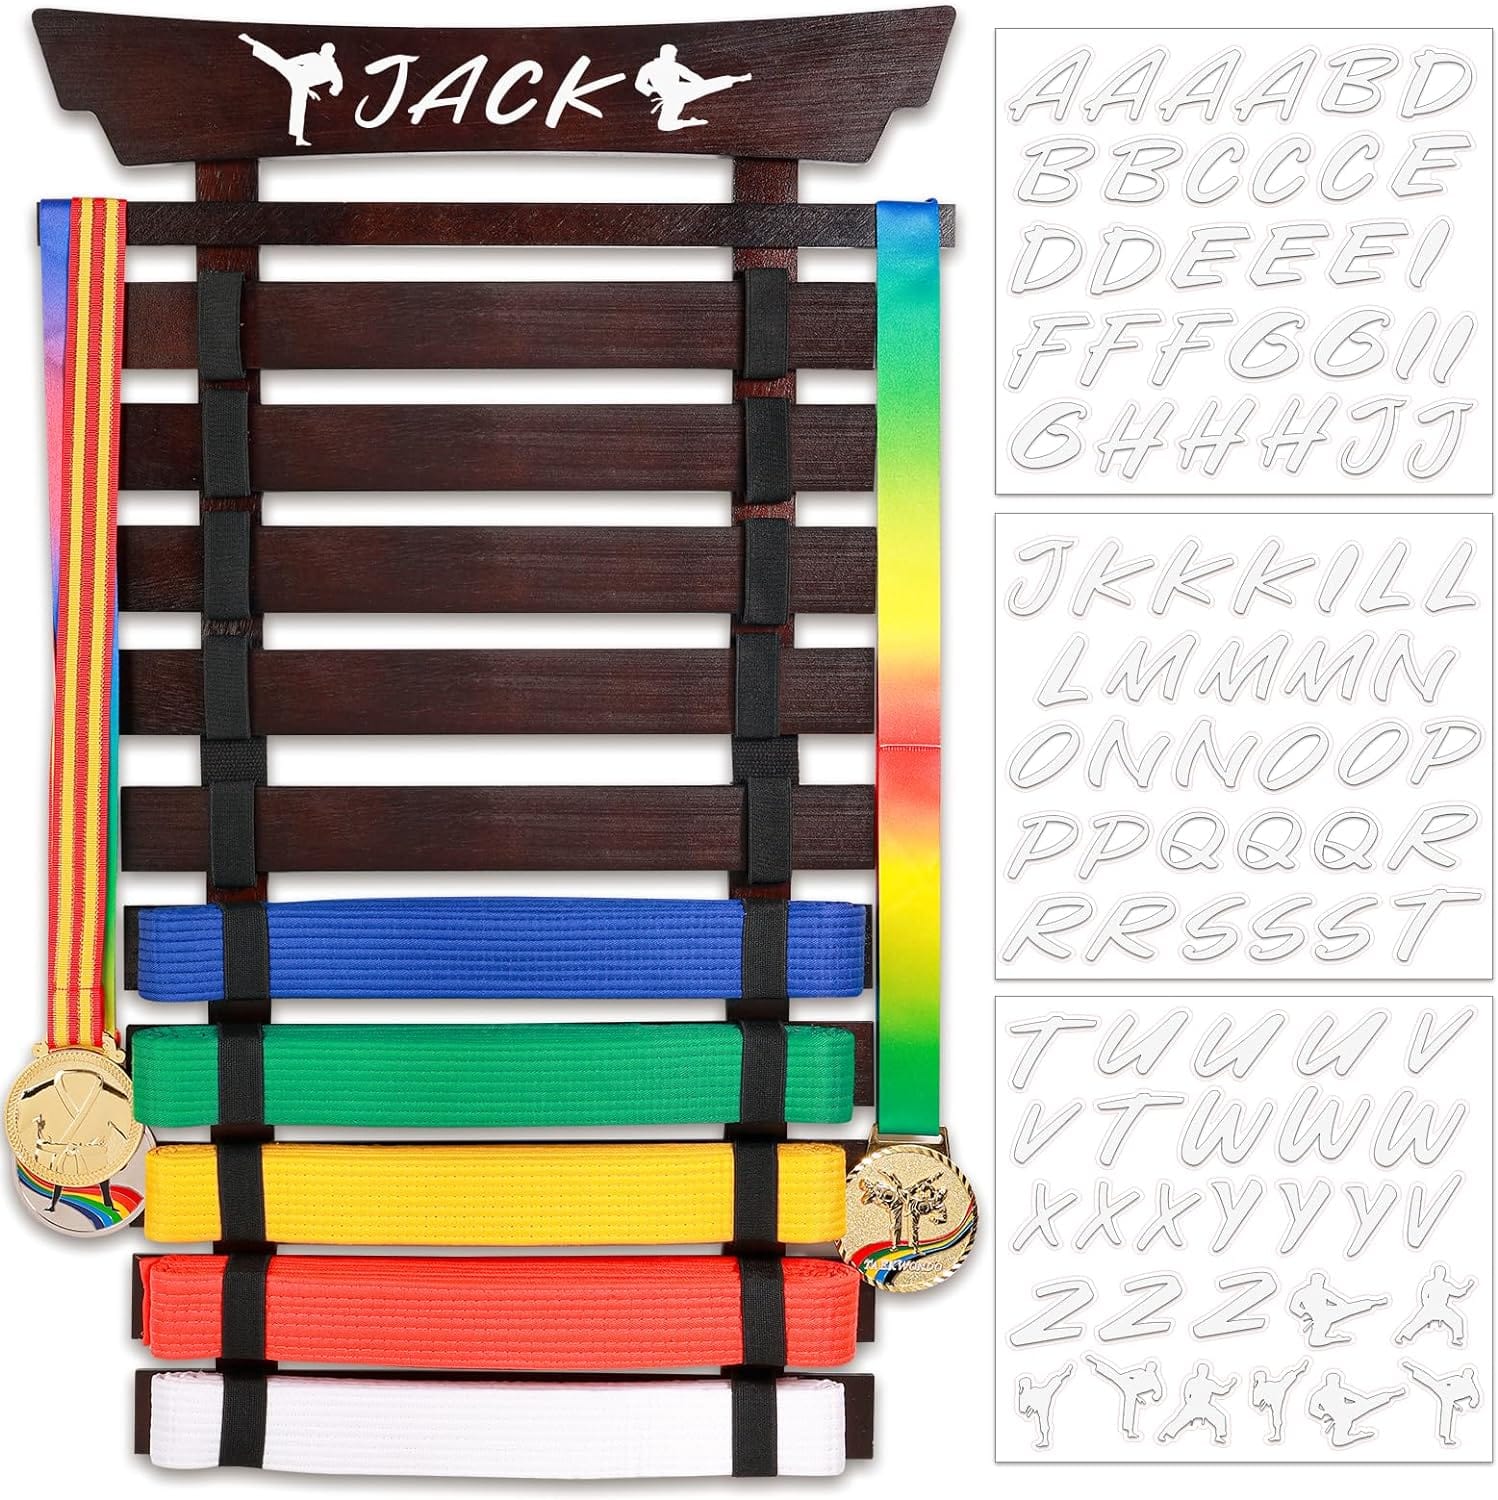 Eclipse Martial Art Supplies sporting goods Walnut 10 Belts Karate Belt Display Rack with Stickers, Taekwondo Belt Display Holder, Martial Arts Belt Display, No Assembly Required, BJJ Hanging Holder for Kids and Adult